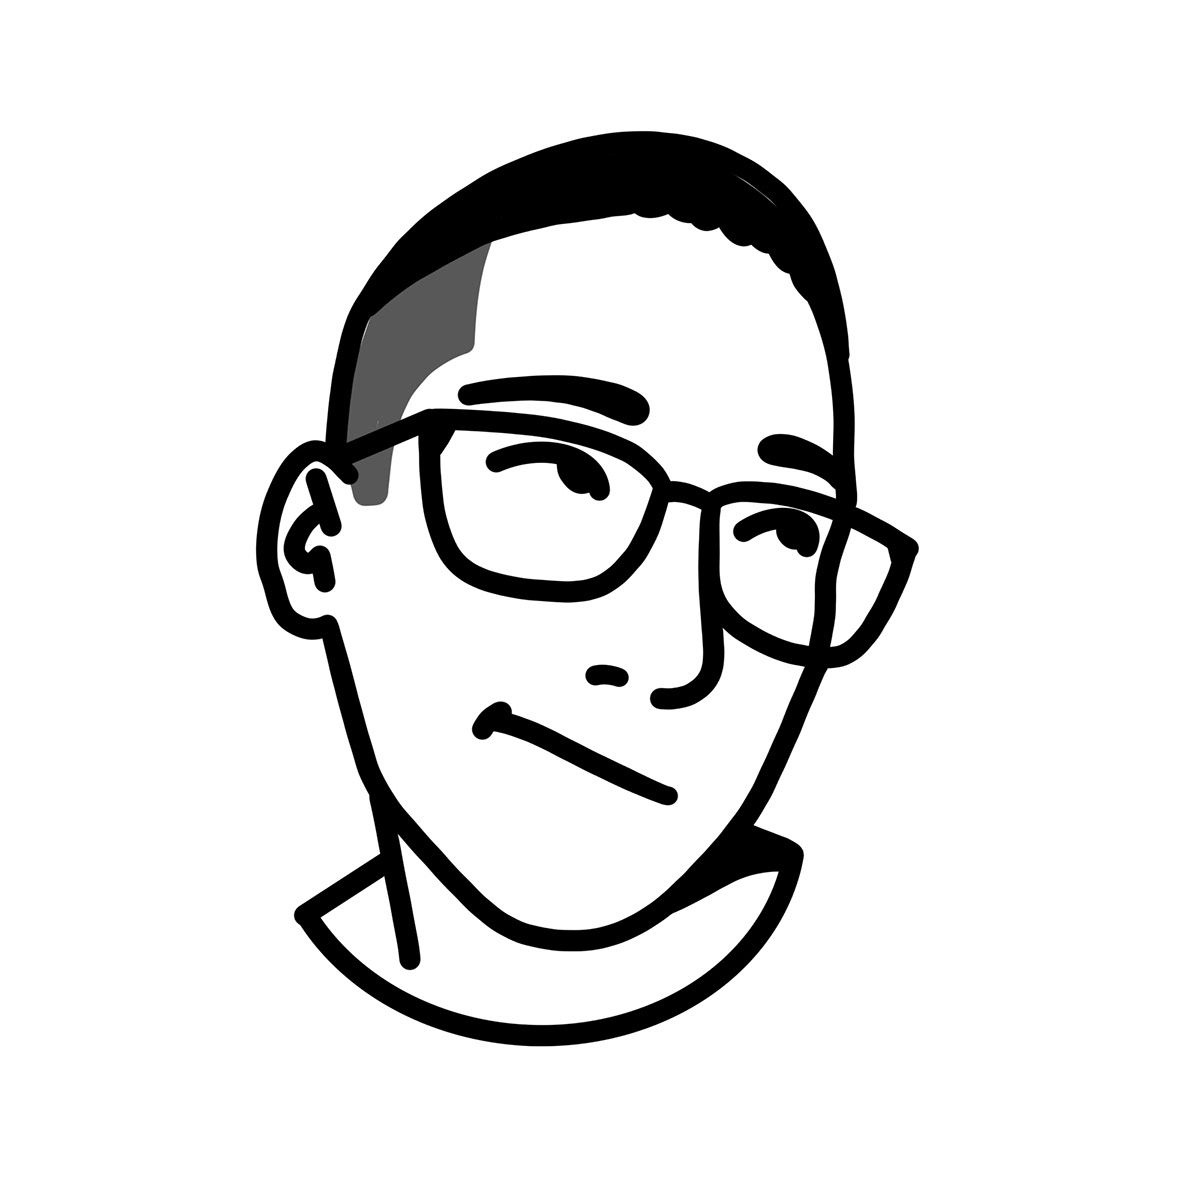 I will illustrate a minimalist avatar drawing for your profile picture by  fajadesign